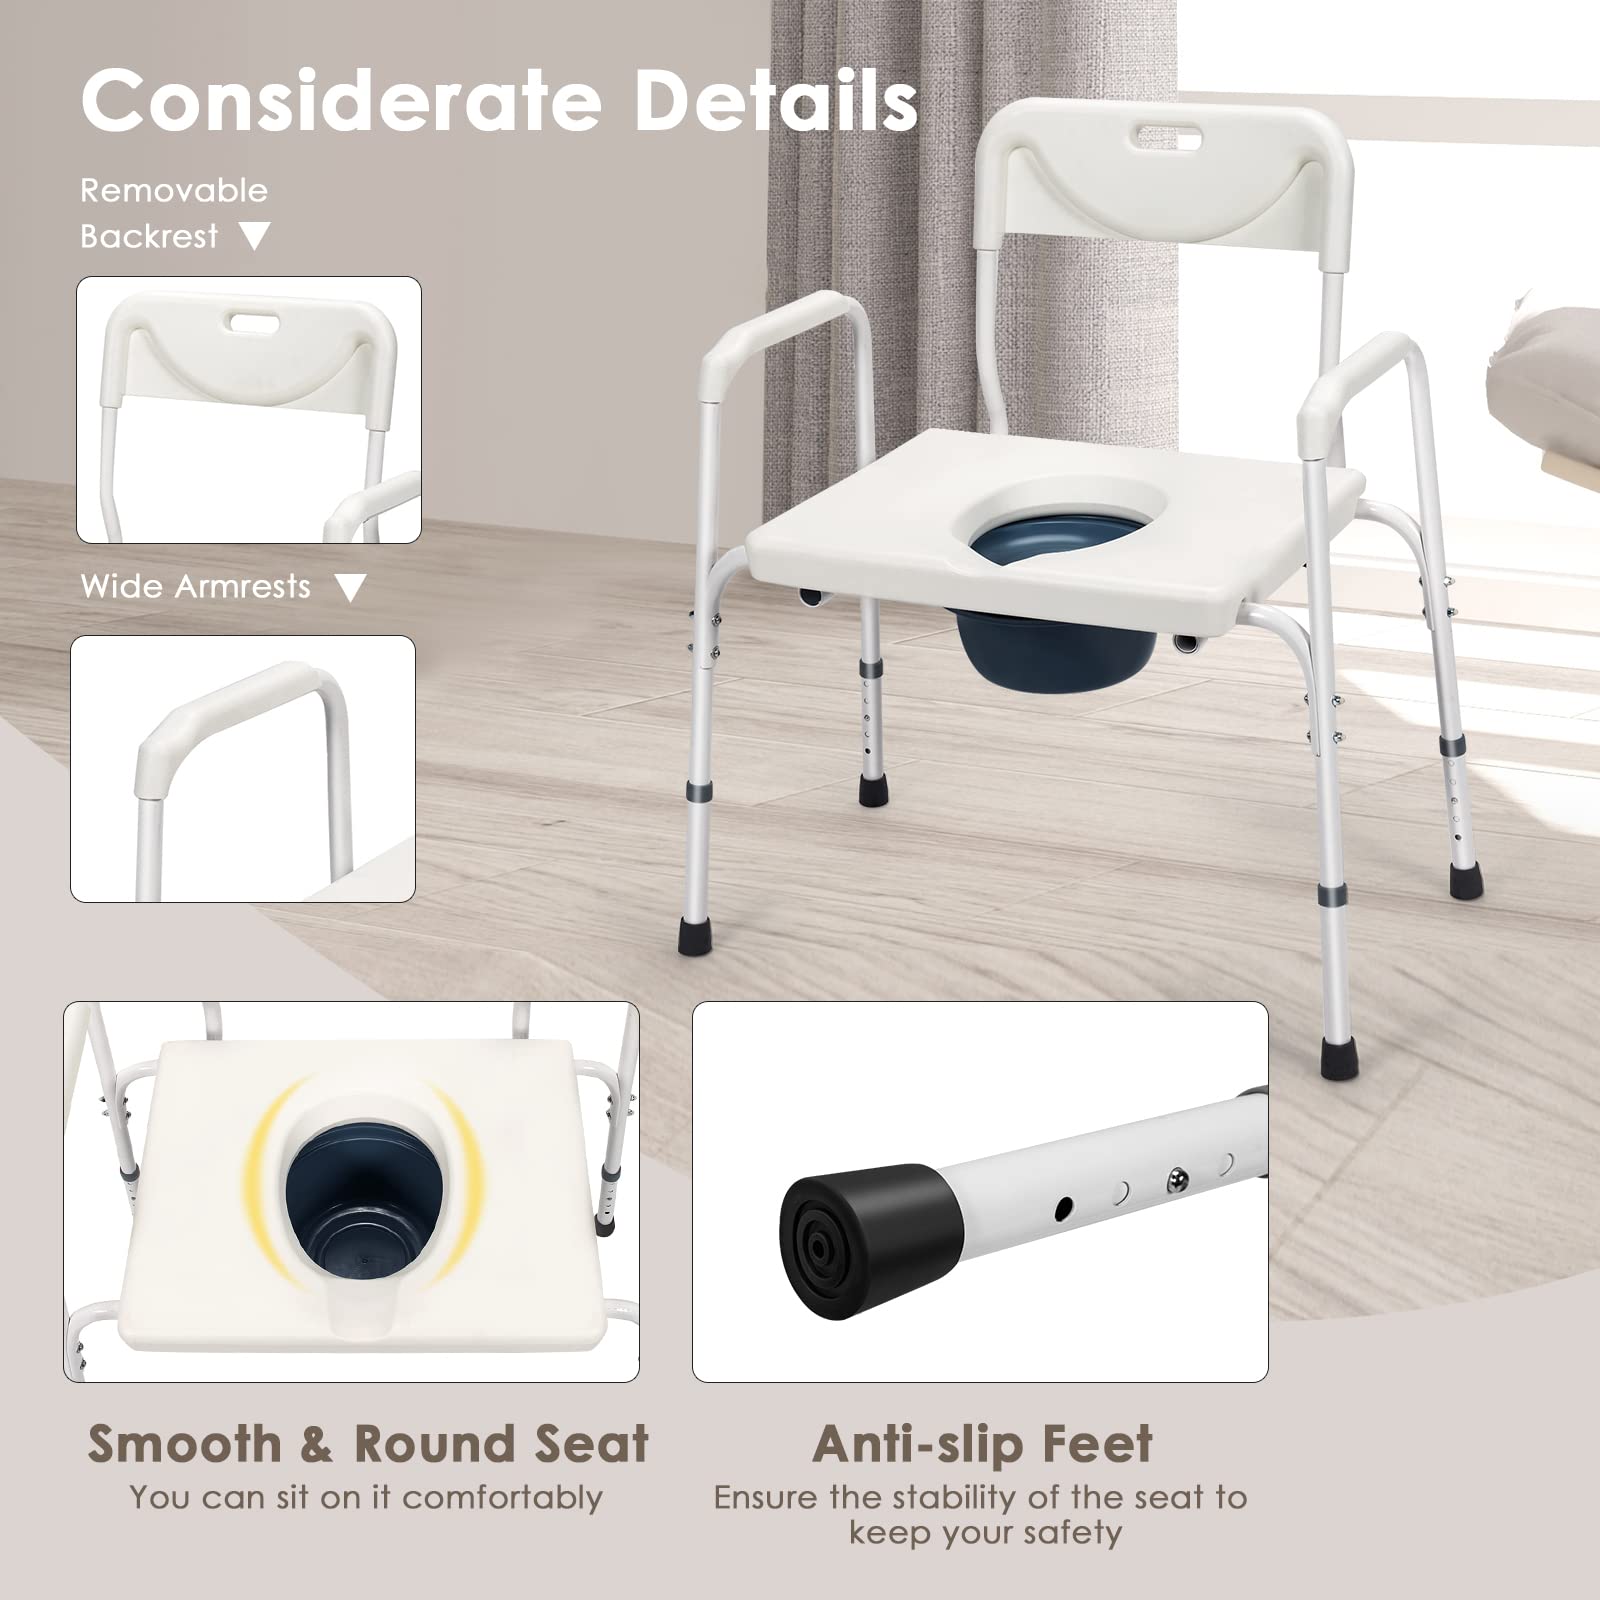 Giantex 3-in-1 Bedside Commode Chair